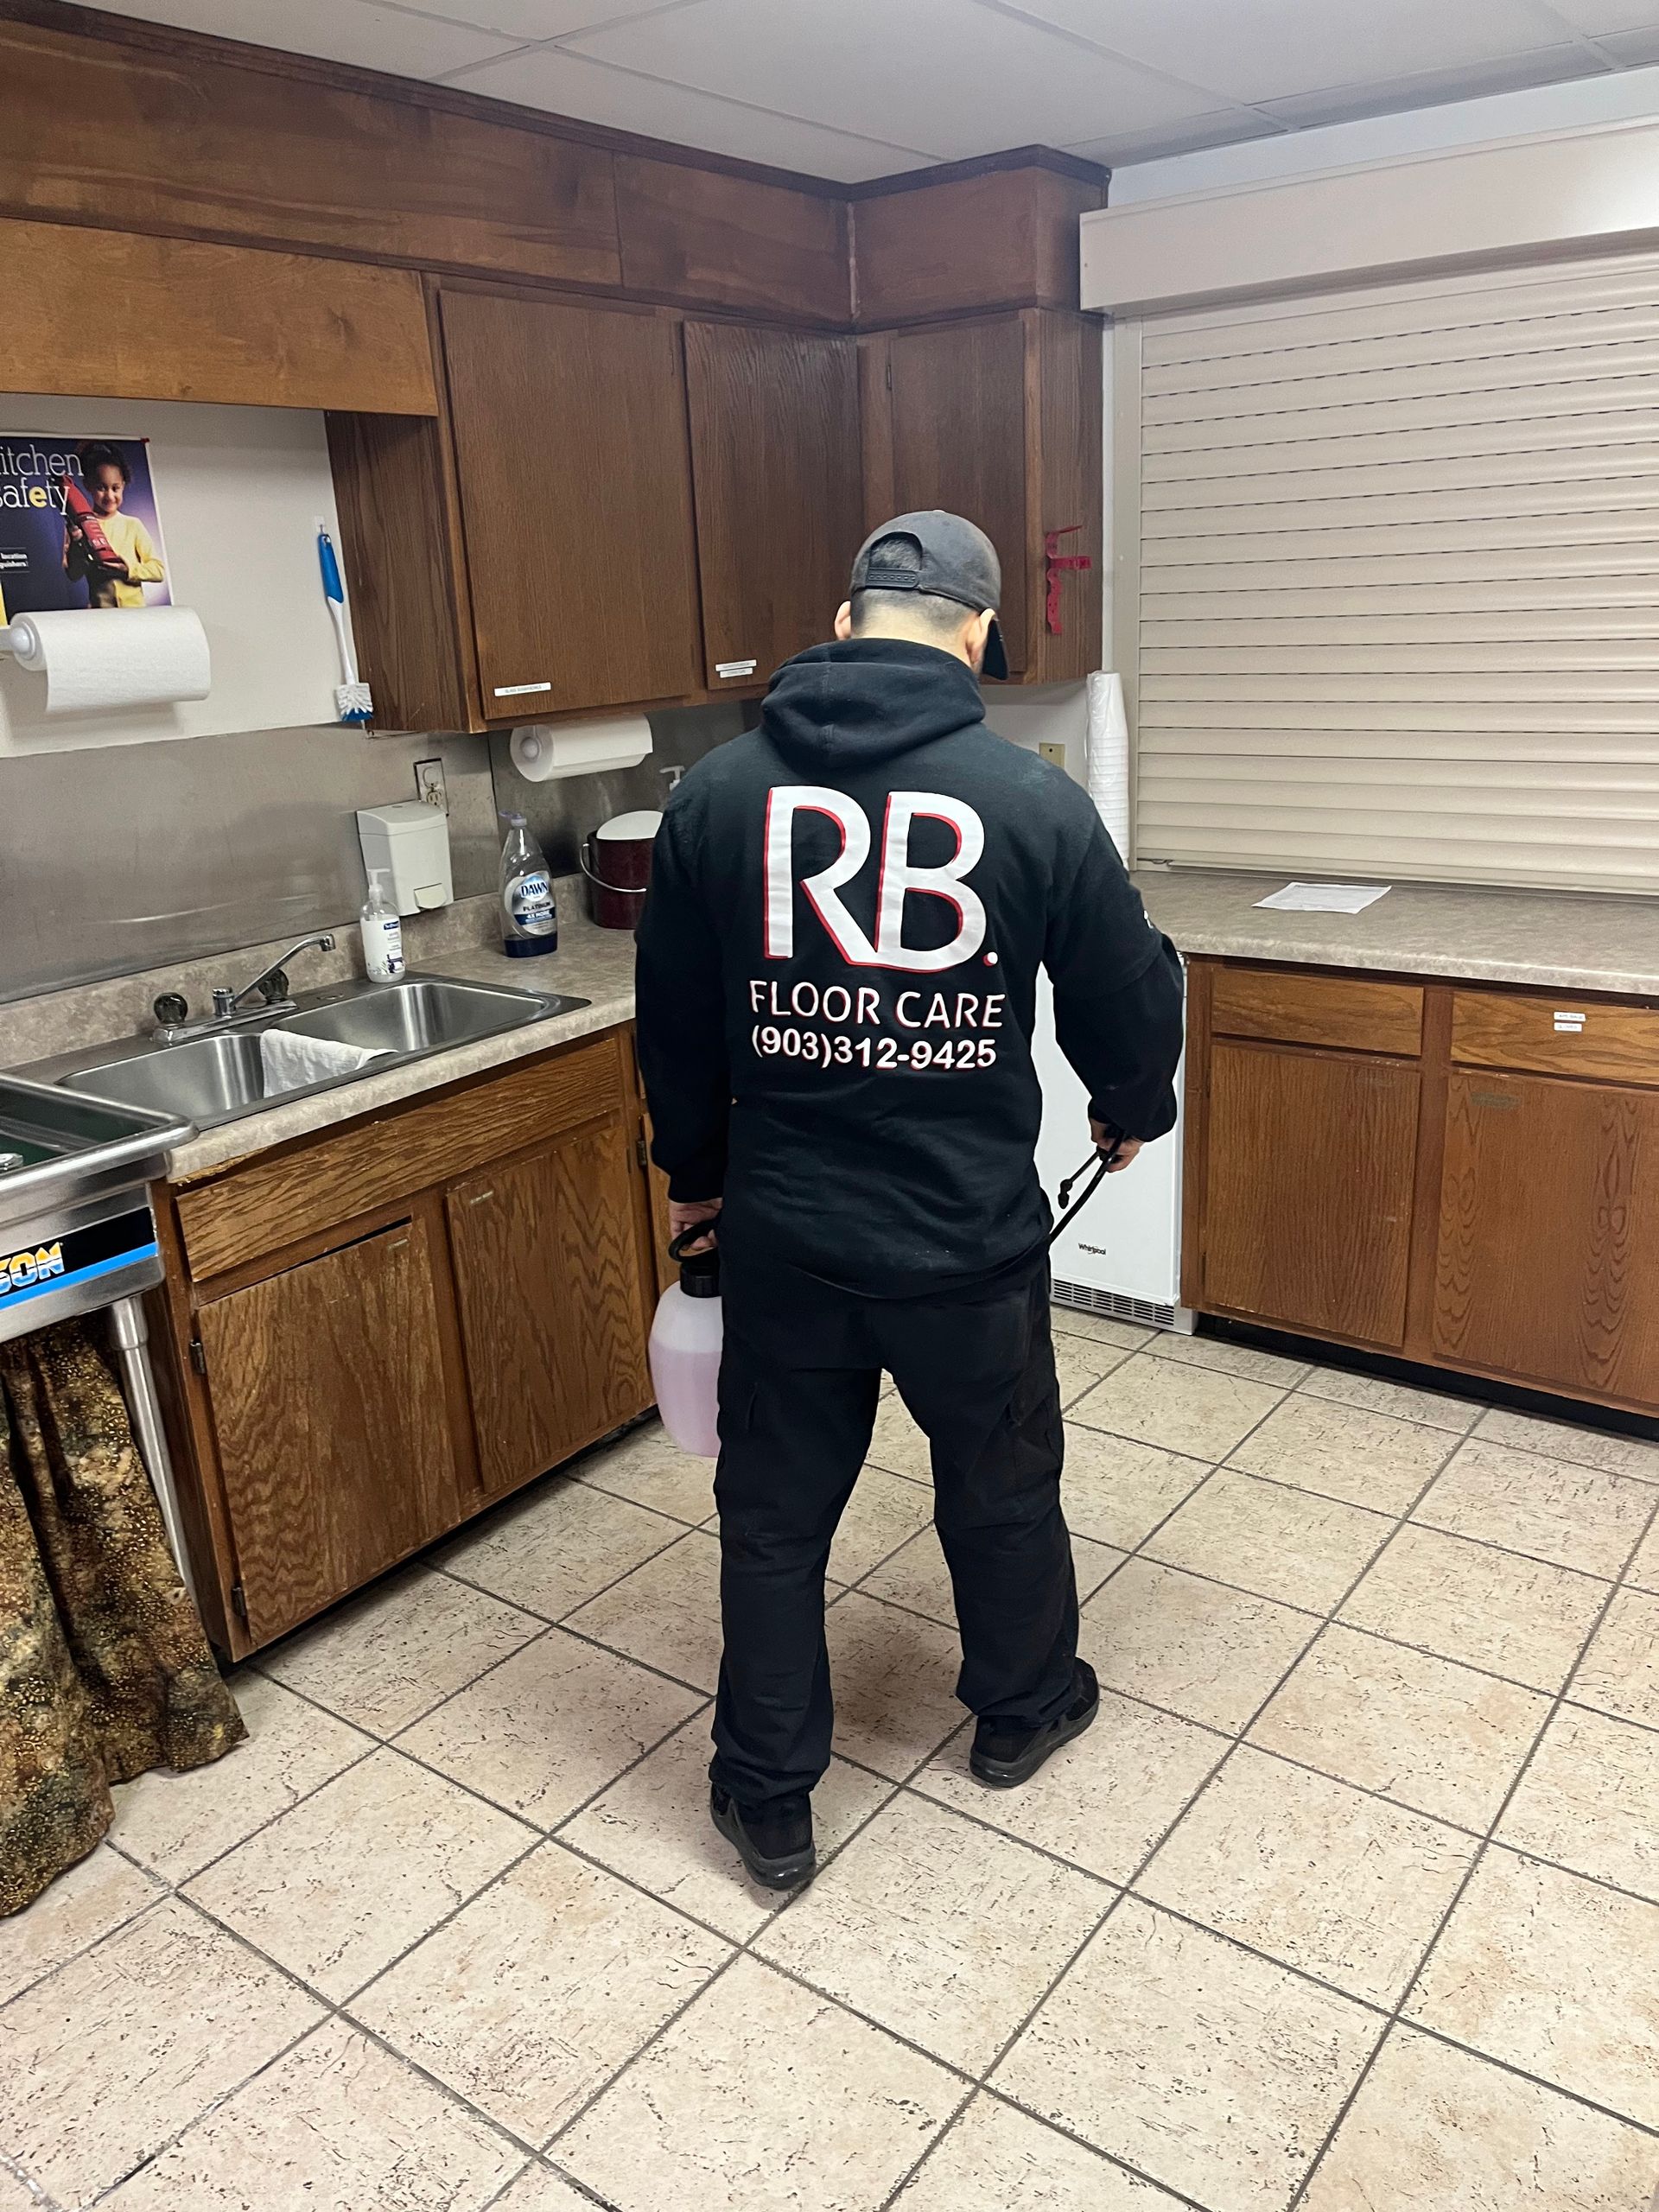 A man in a black rb hoodie is standing in a kitchen.